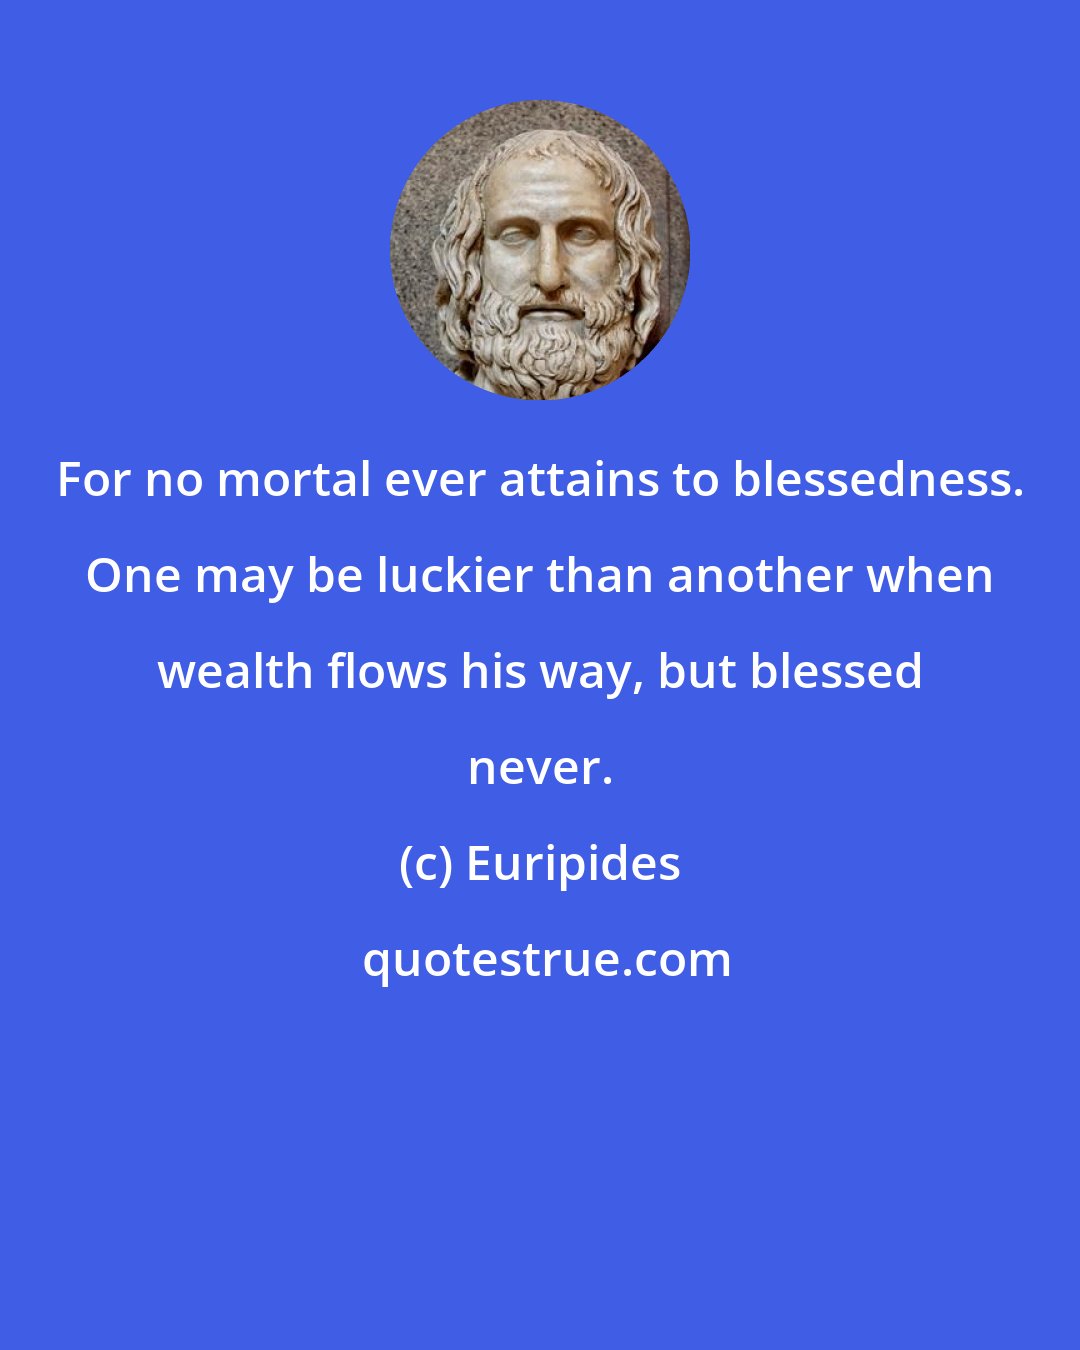 Euripides: For no mortal ever attains to blessedness. One may be luckier than another when wealth flows his way, but blessed never.